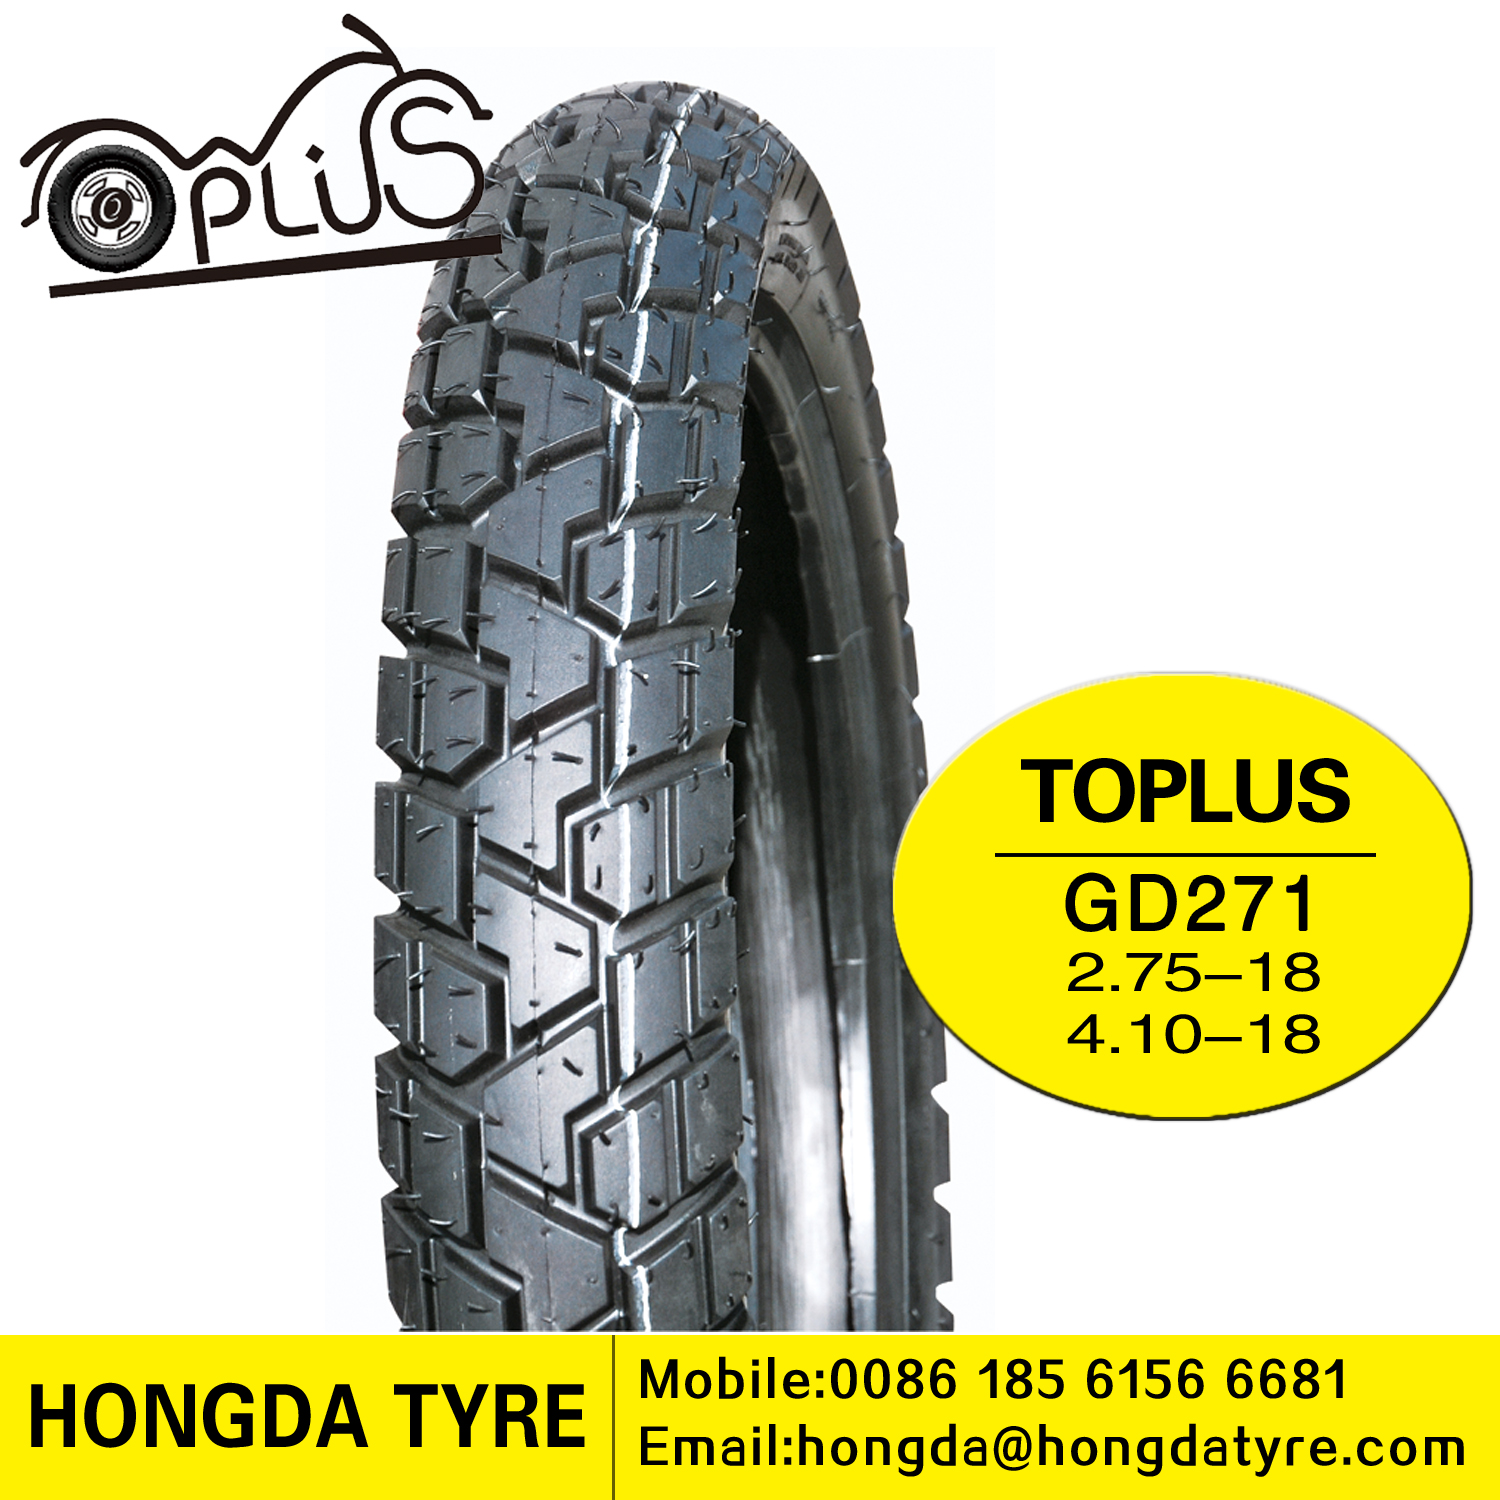 Motorcycle tyre GD271